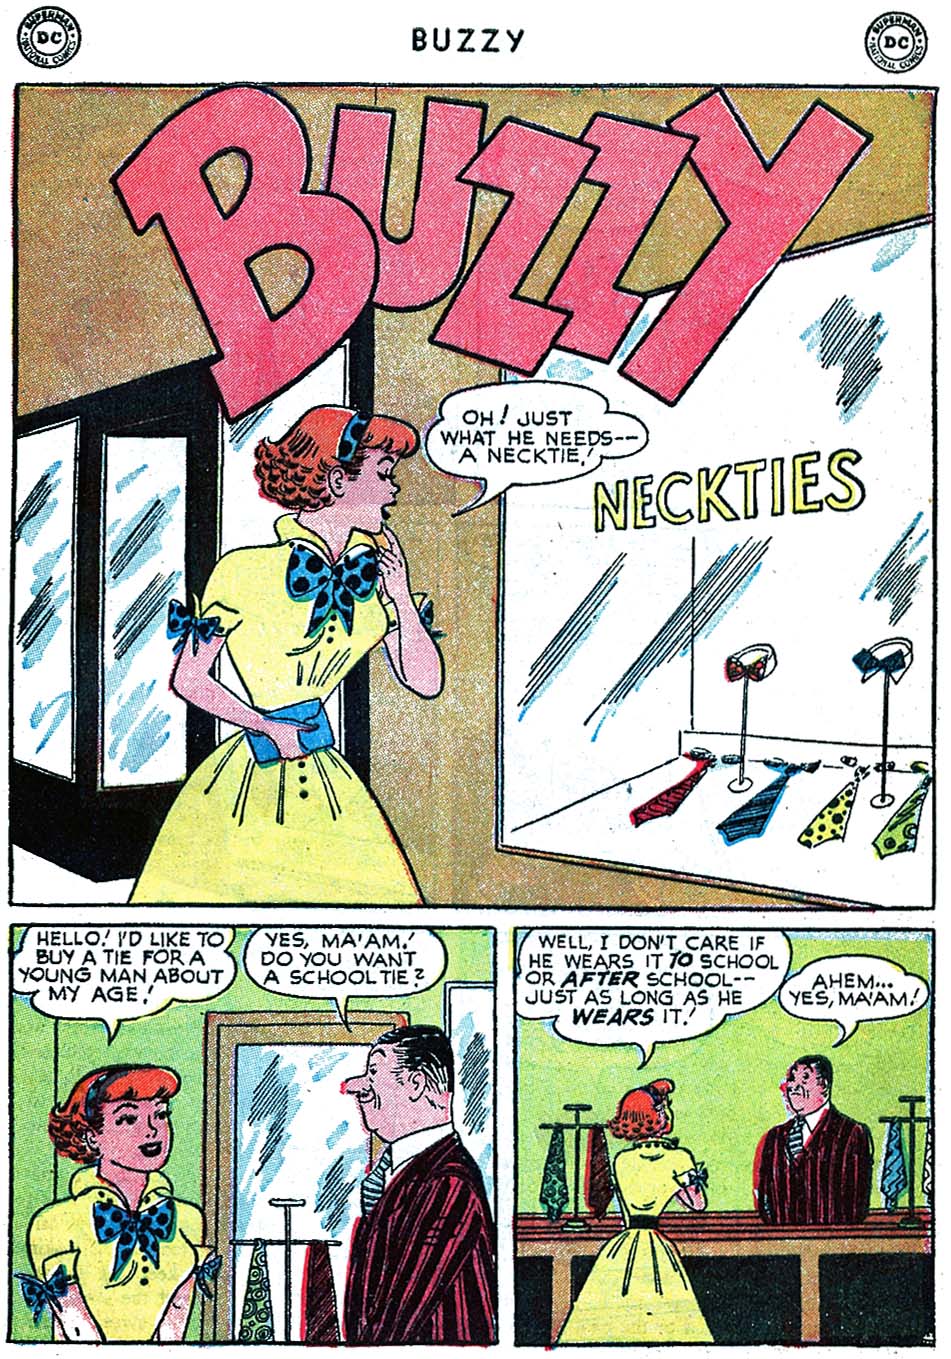 Read online Buzzy comic -  Issue #59 - 29